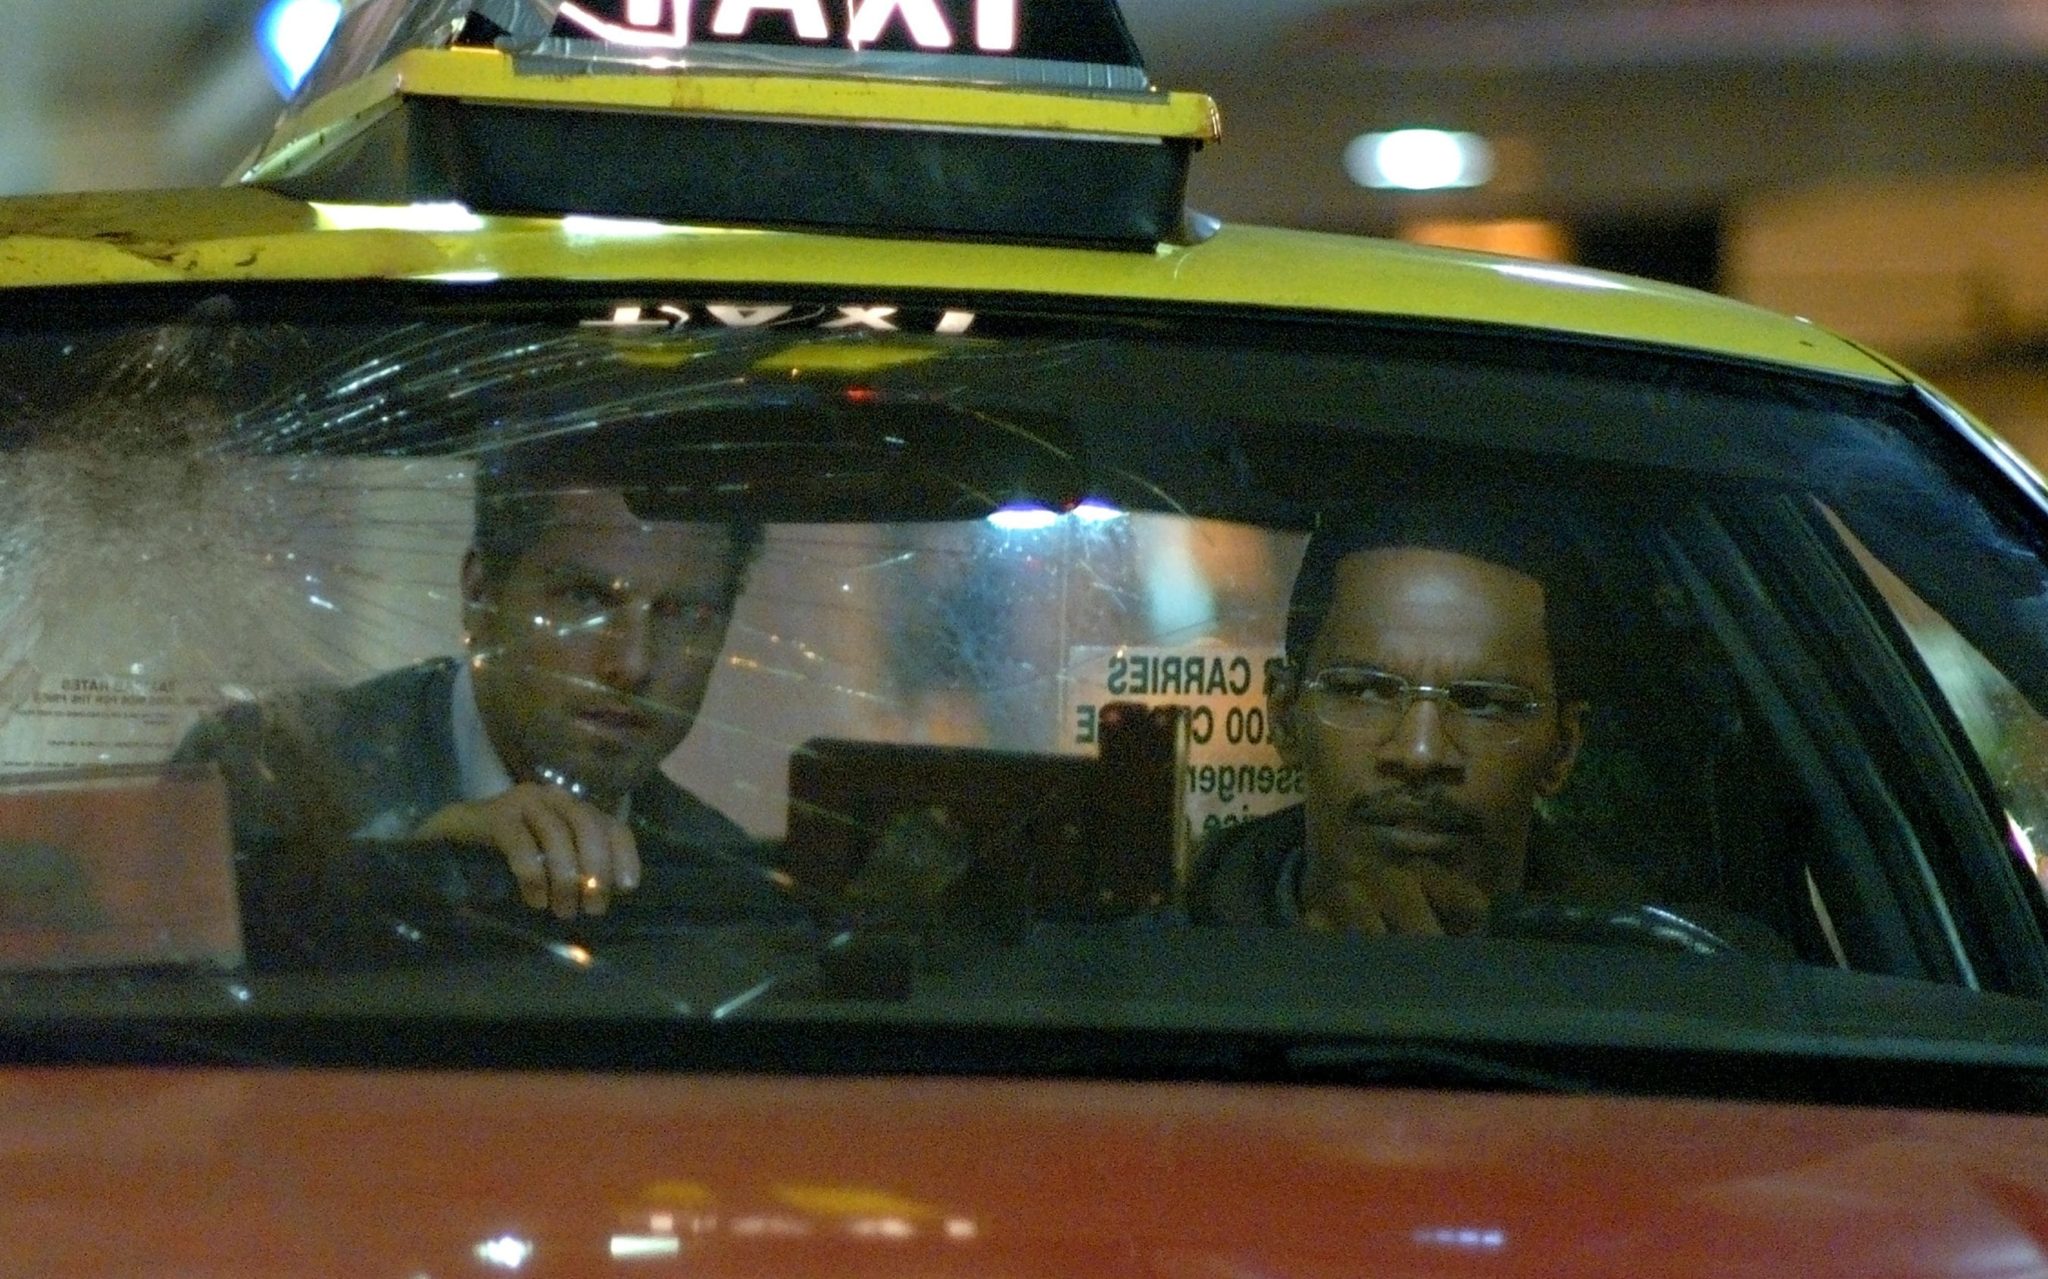 Tom Cruise and Jamie Foxx in Collateral